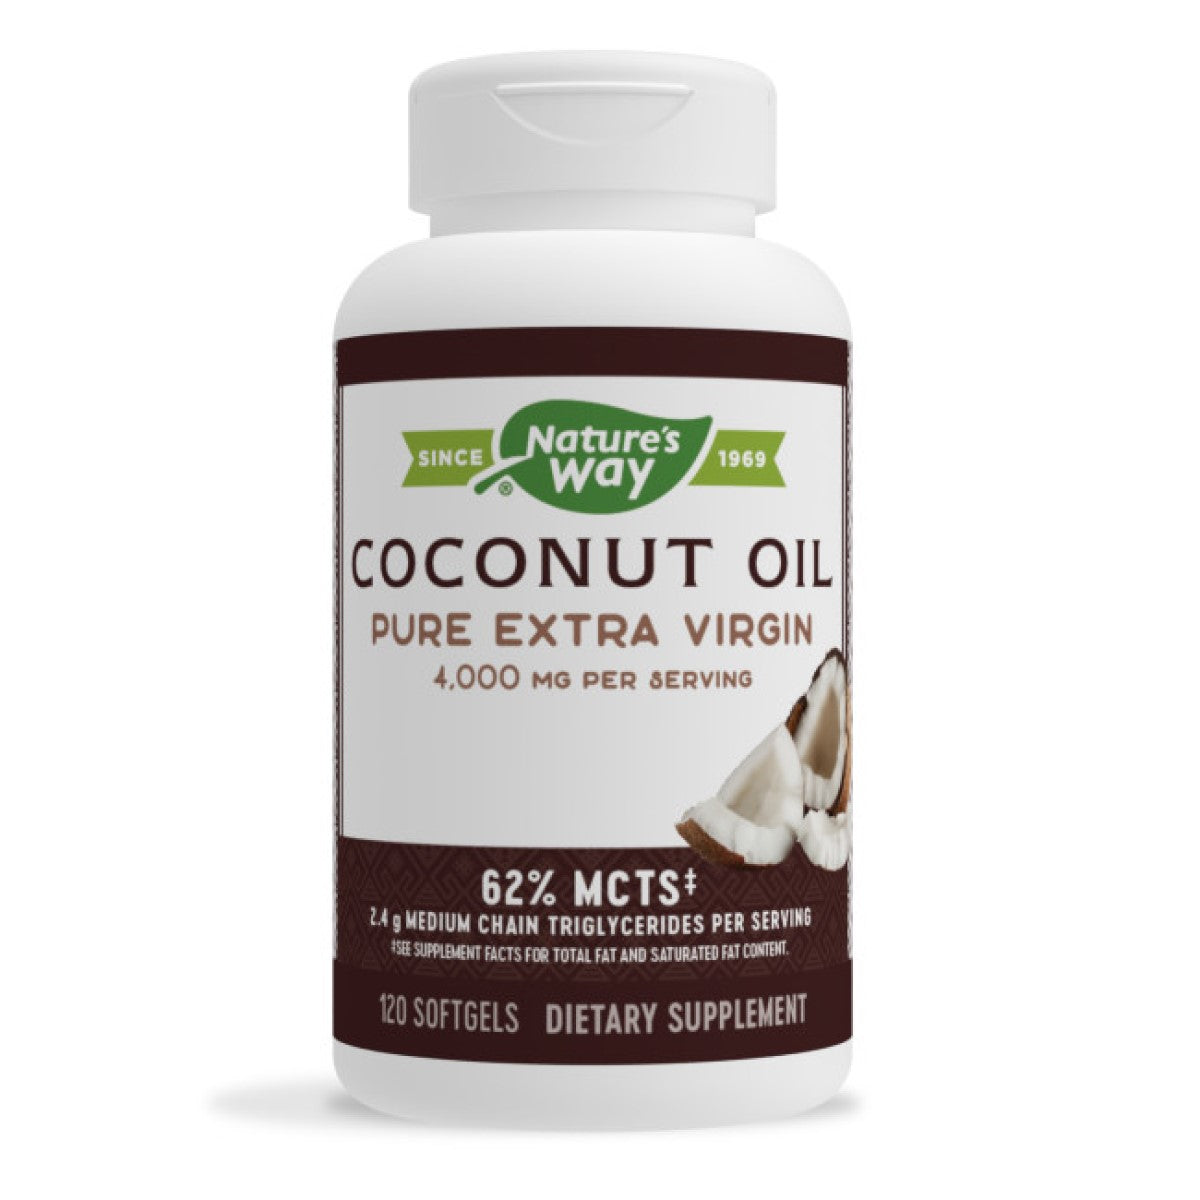 Primary image of Coconut Oil Softgels